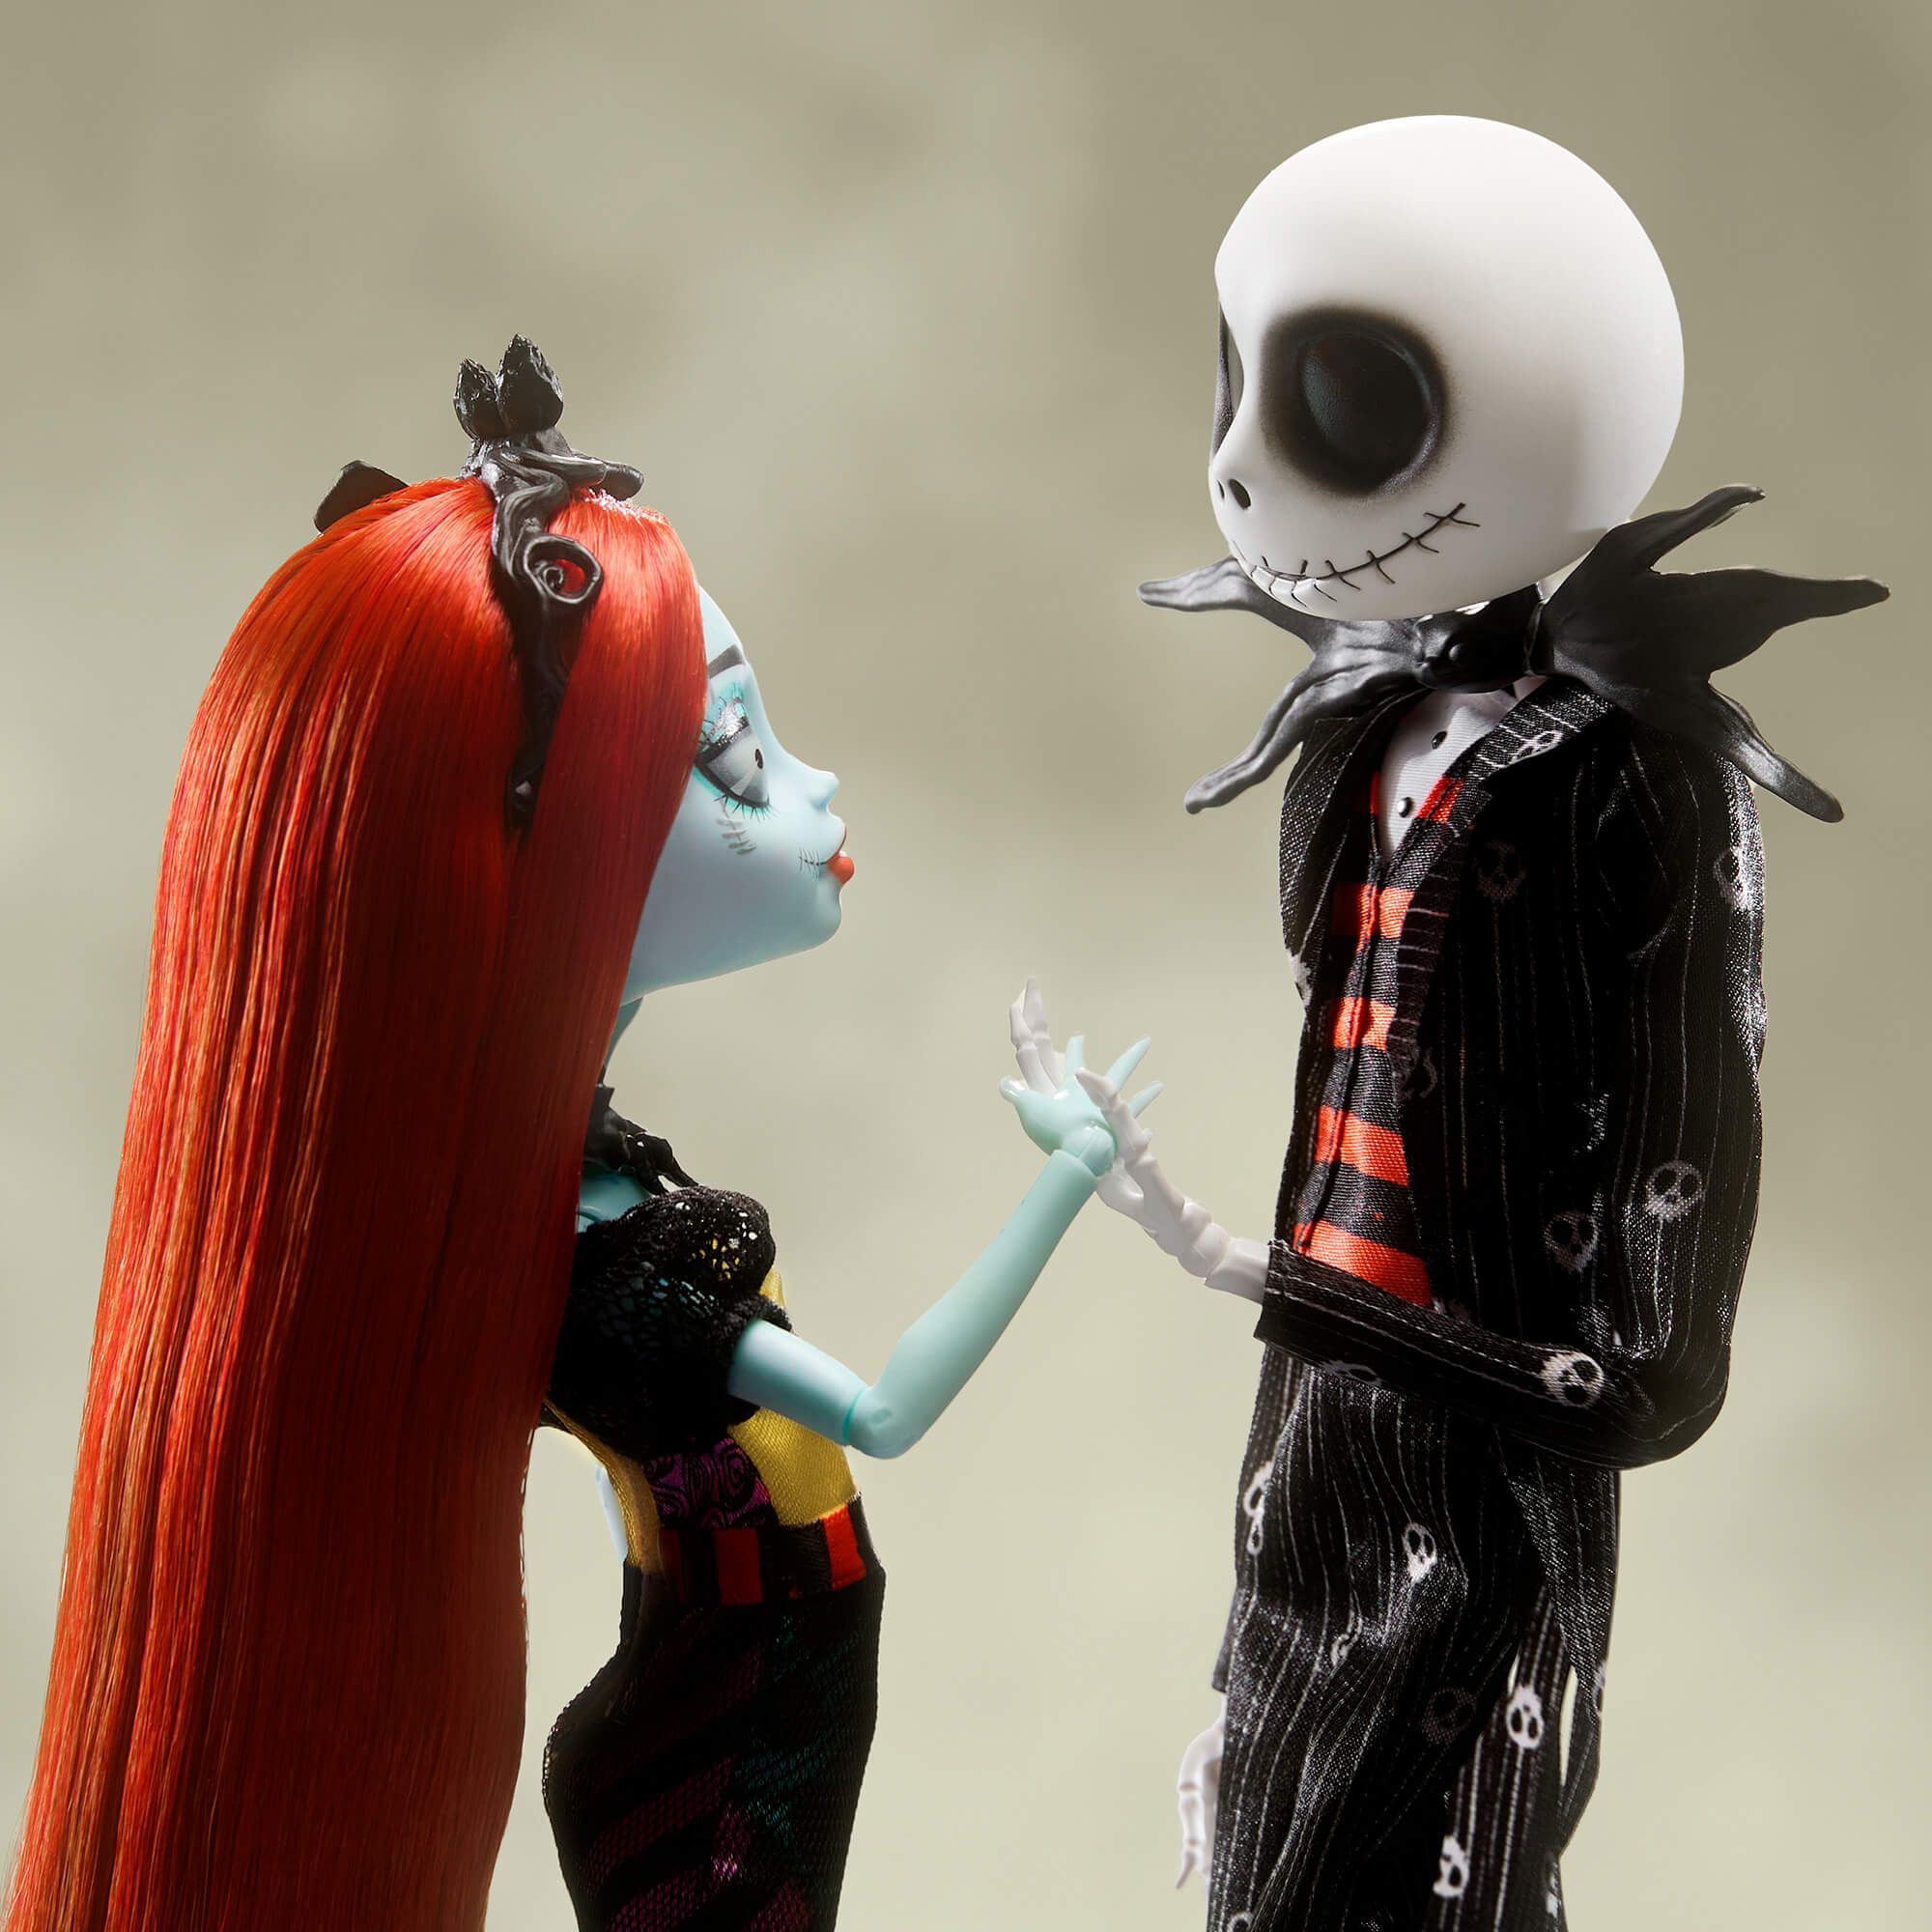 PRE-ORDER Monster High Skullector The Nightmare Before Christmas Dolls